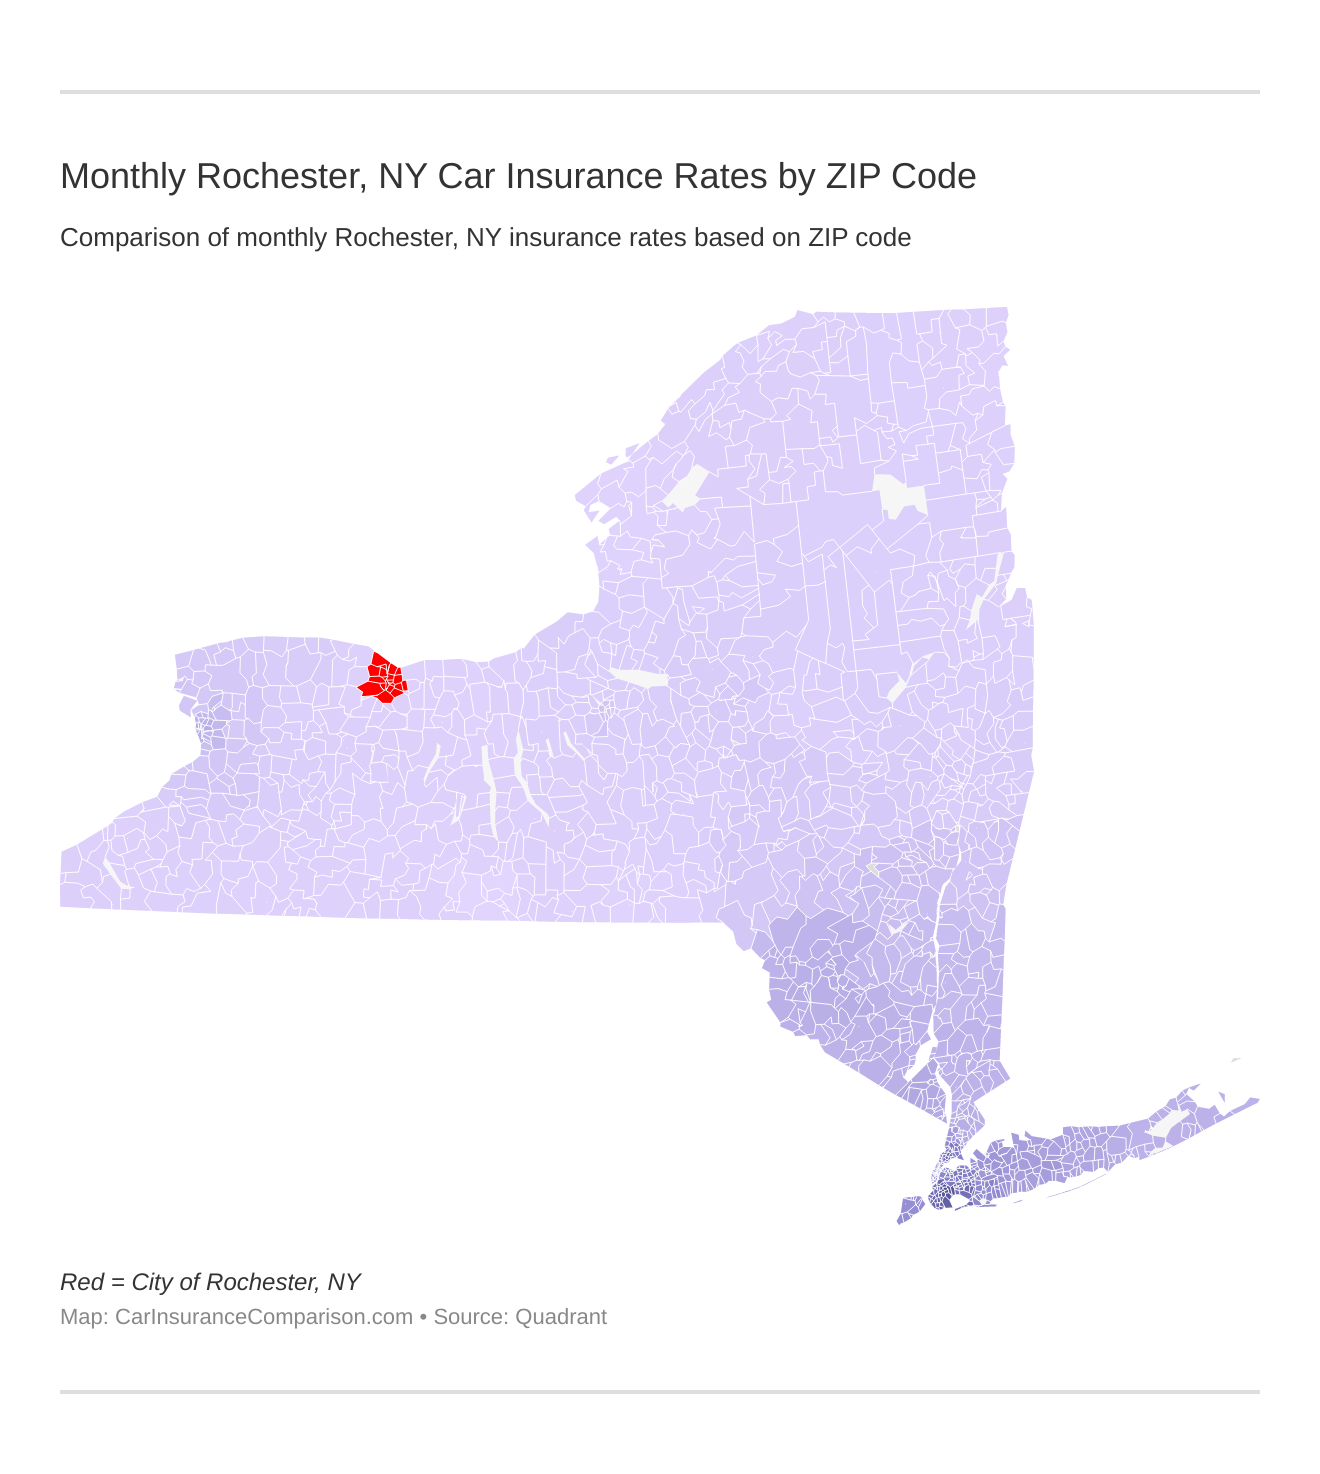 Monthly Rochester, NY Car Insurance Rates by ZIP Code